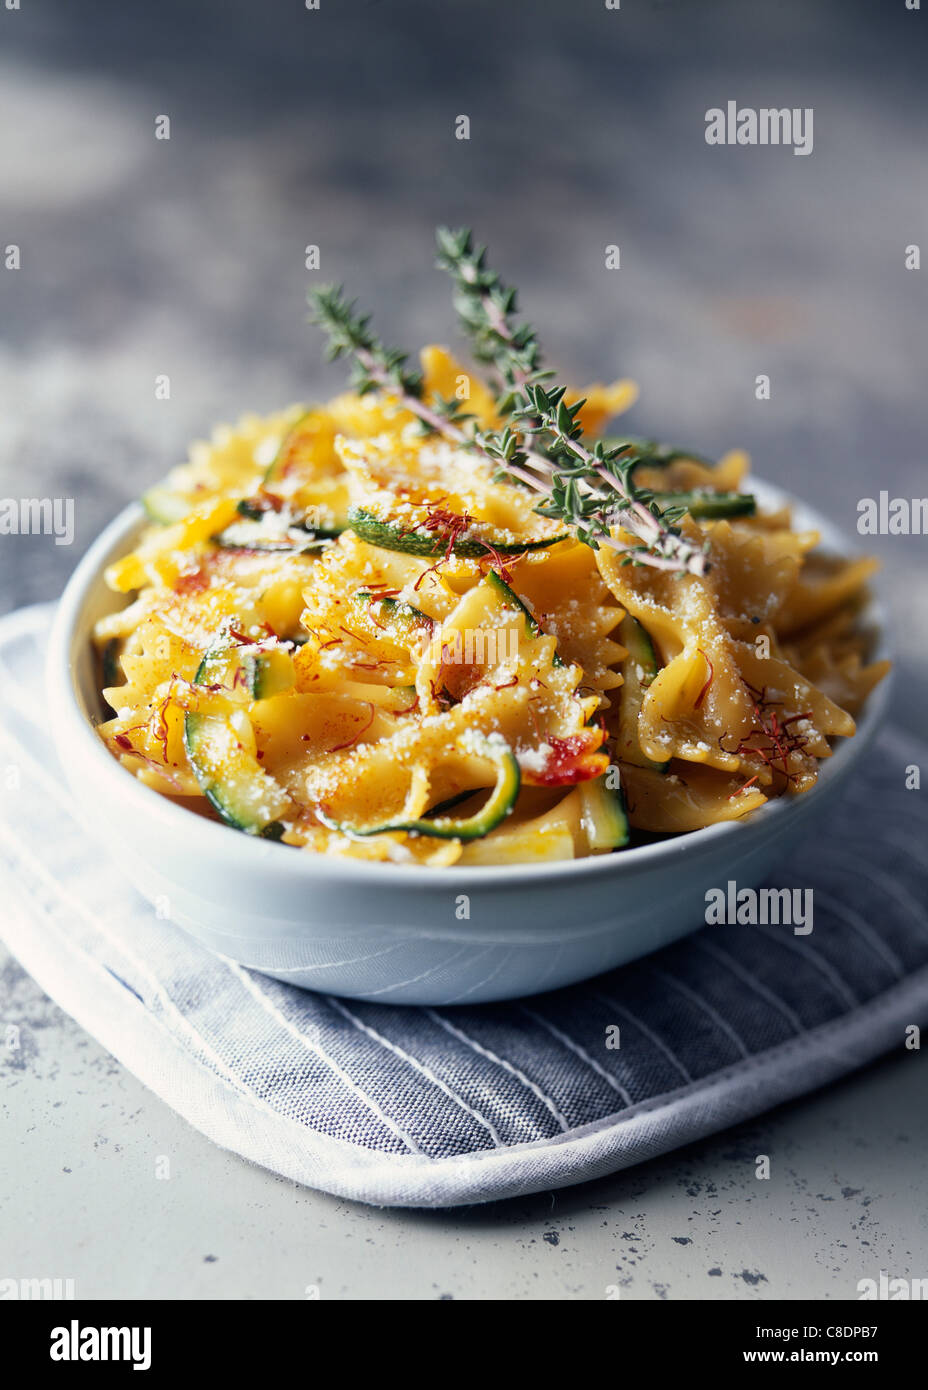 Farfalle with zucchinis and saffron Stock Photo